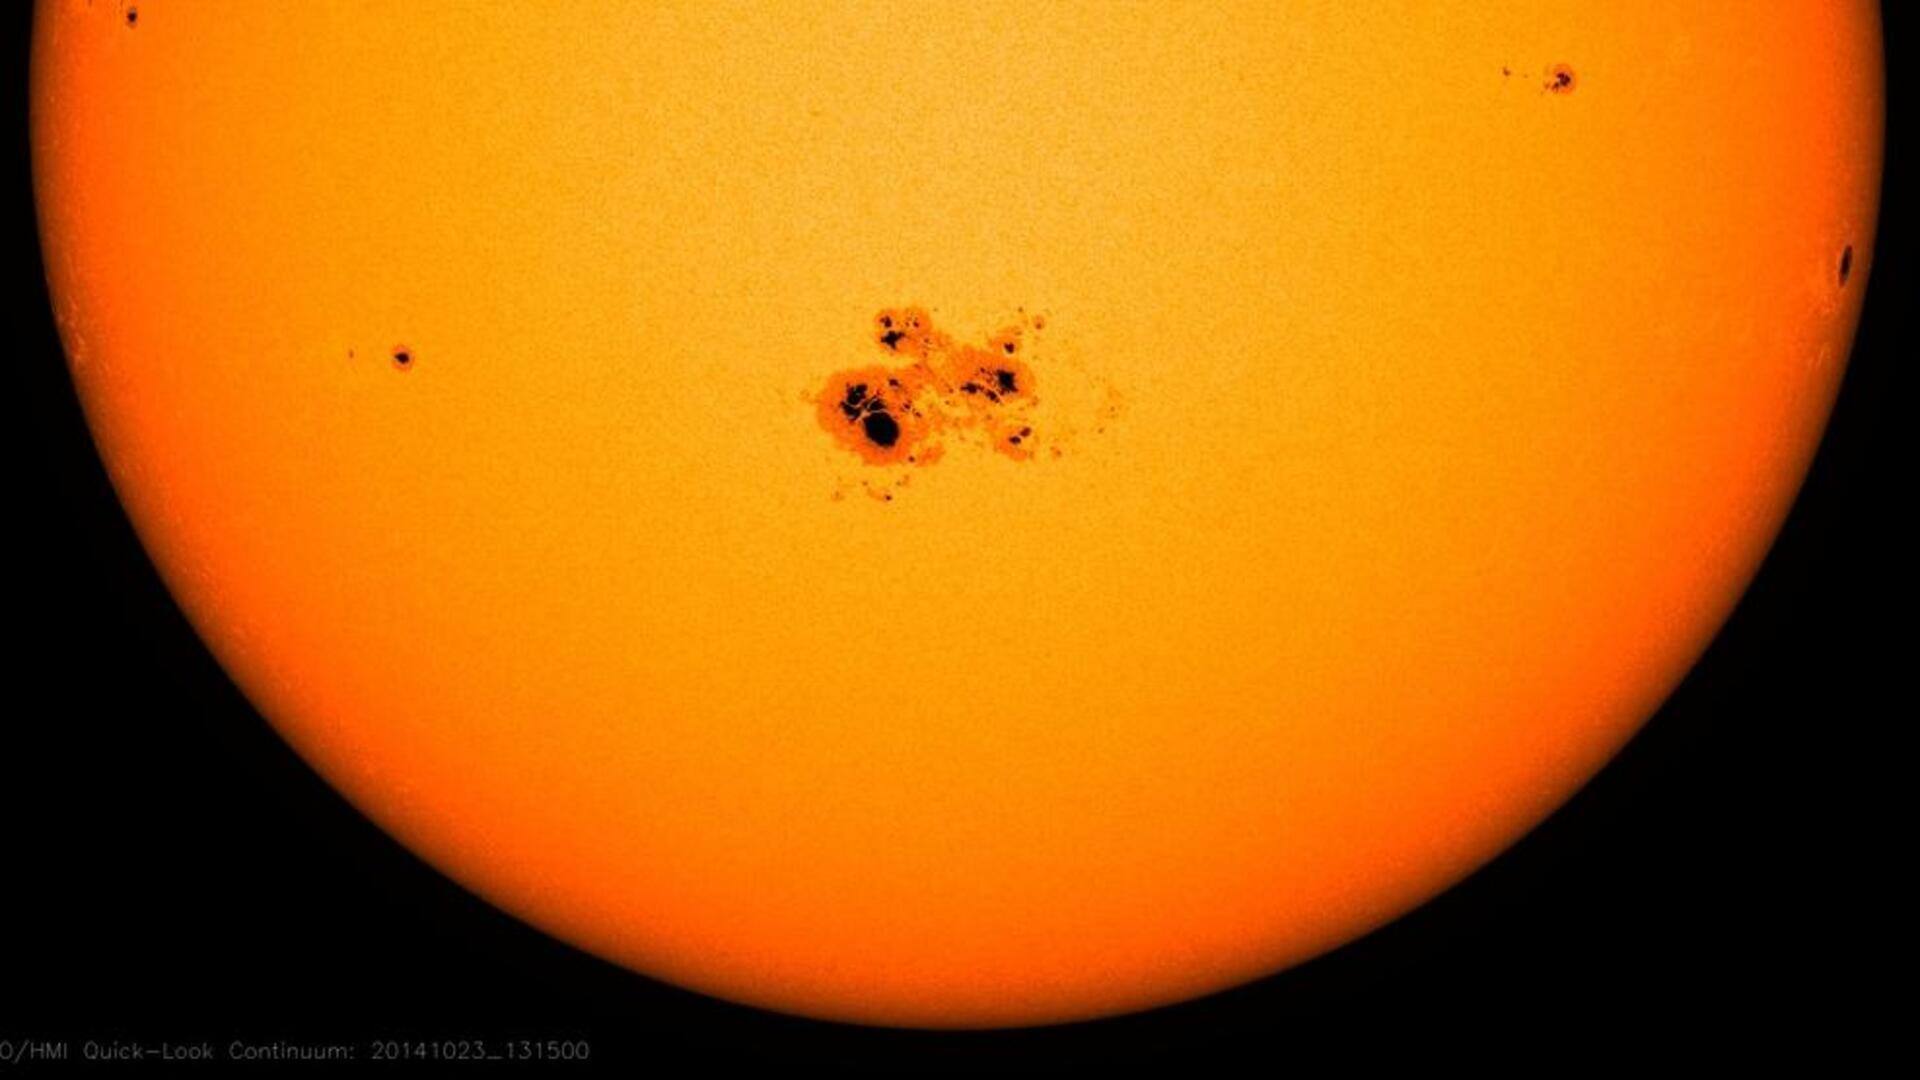 NASA Perseverance identifies sunspot that could soon point toward Earth